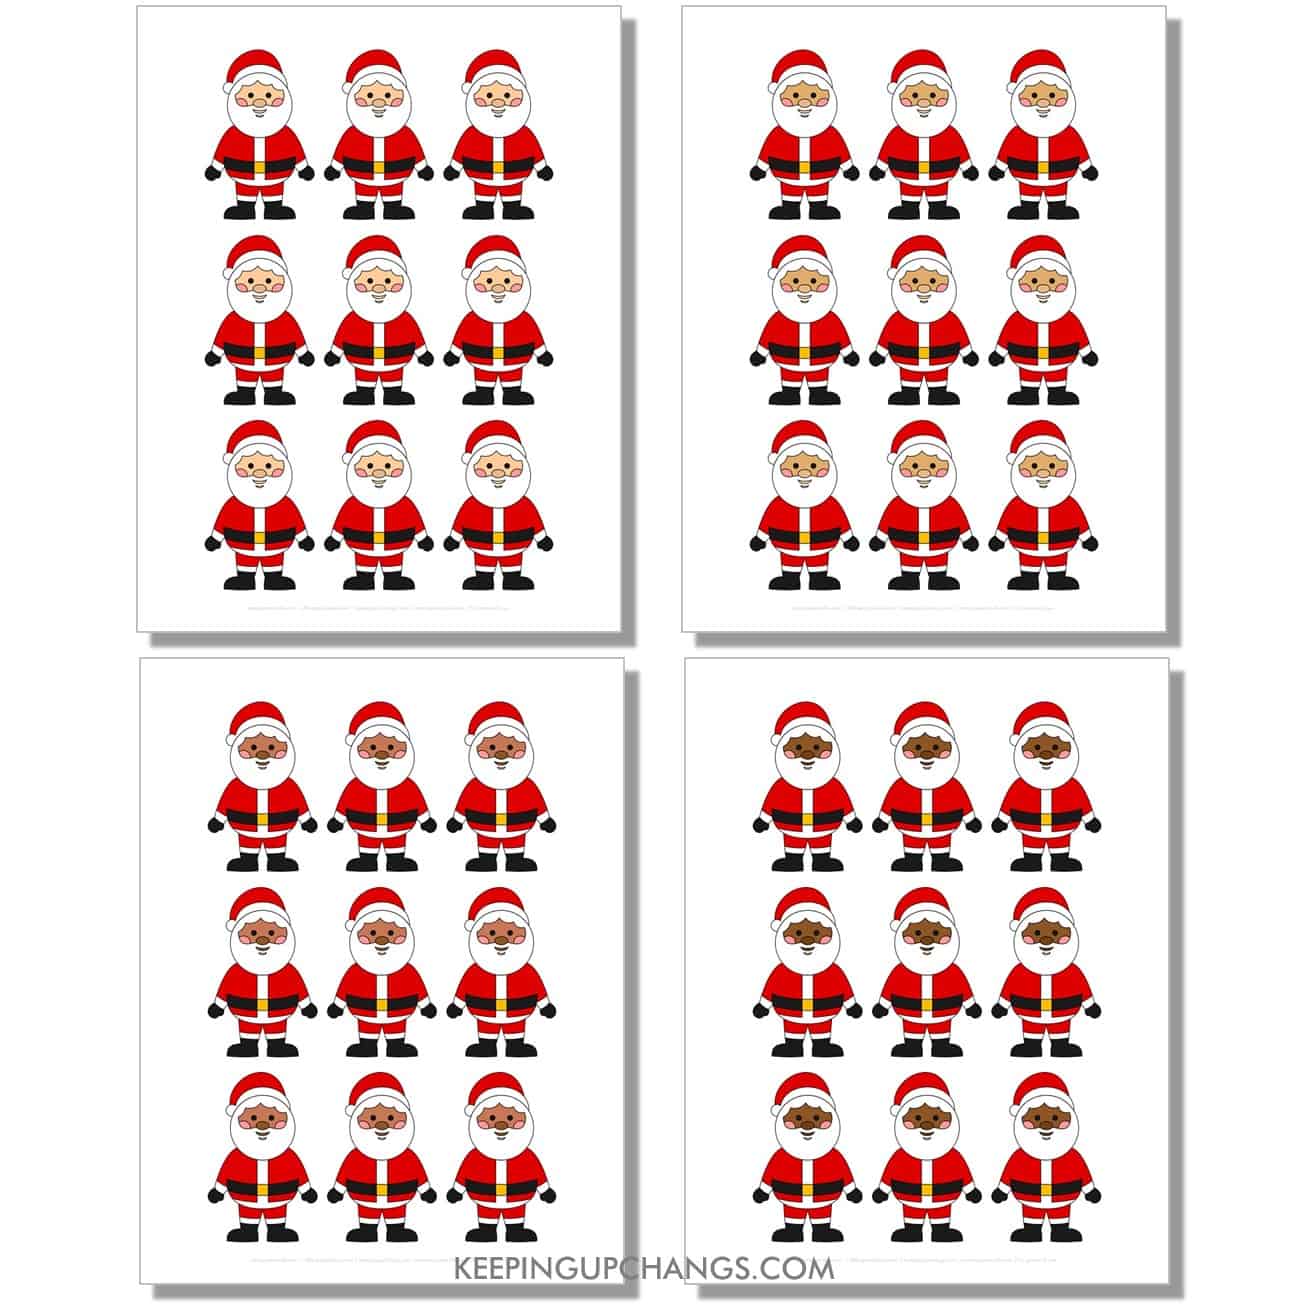 free small, mini standing santa outline, cut out template in color, red, black, white for light, medium, dark skin tones, races.